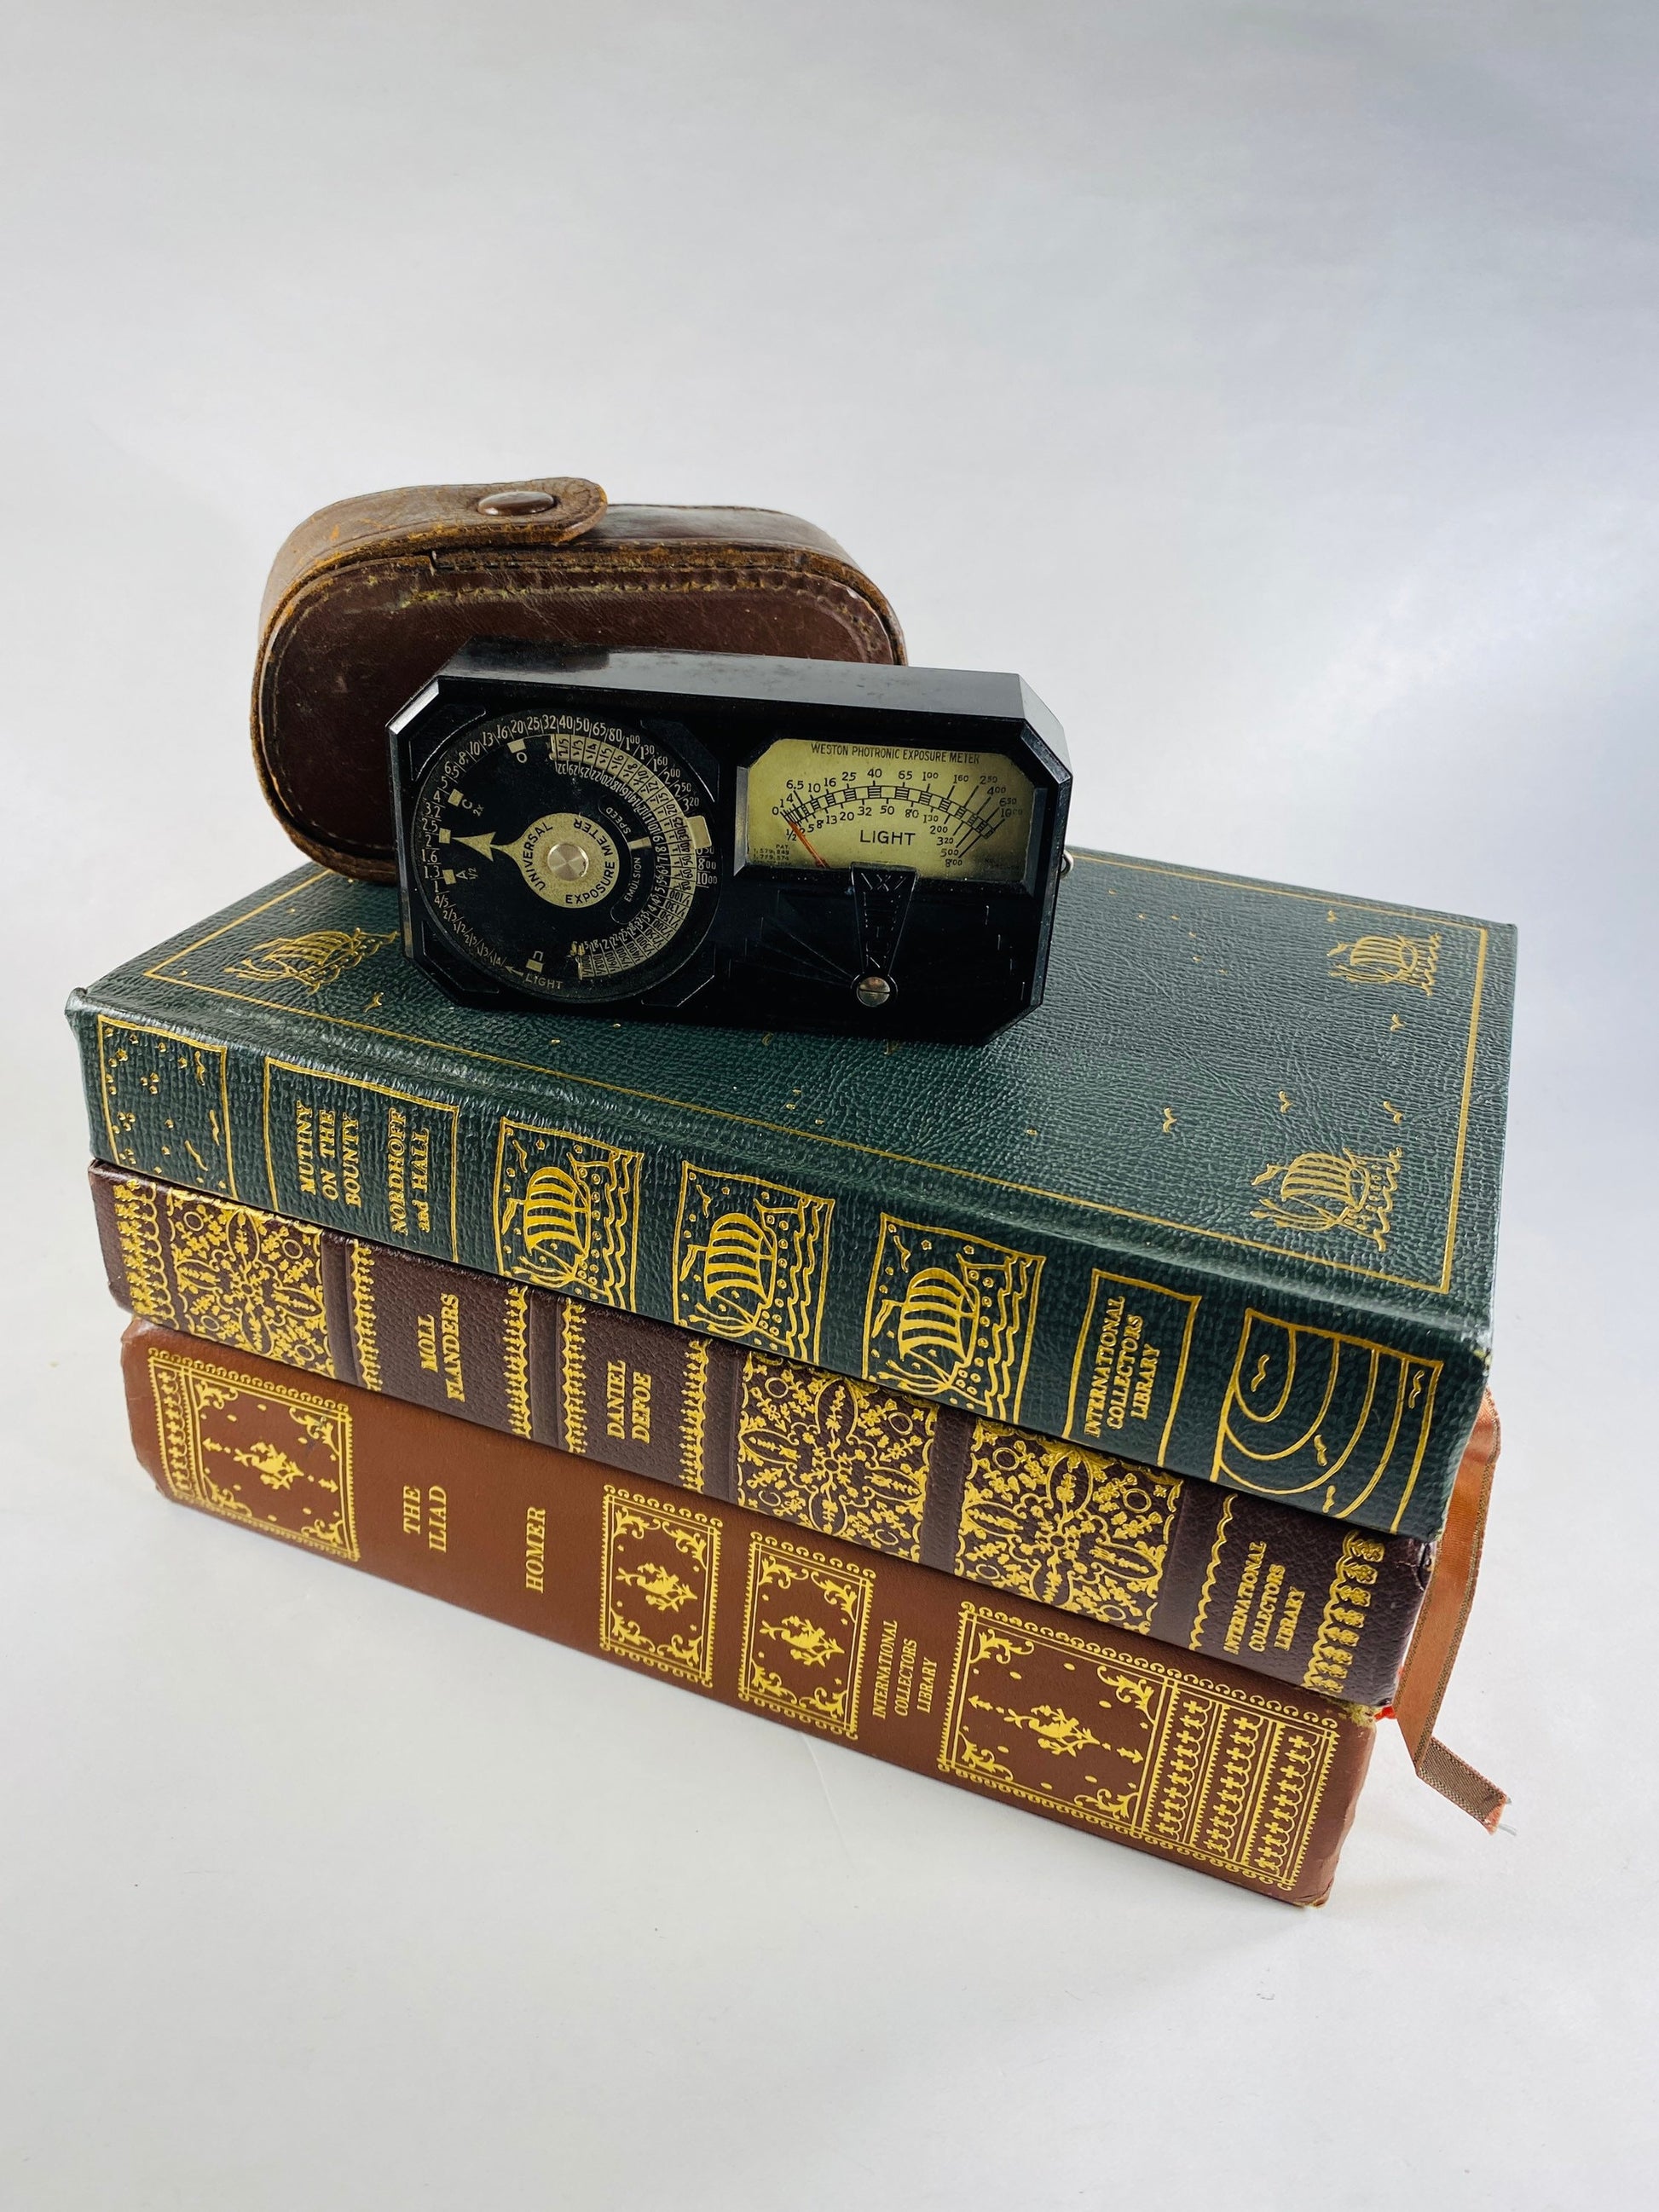 GORGEOUS Art Deco Weston Photronic Exposure Meter Model 650 circa 1935 Highly collectible Retro camera decor with leather case